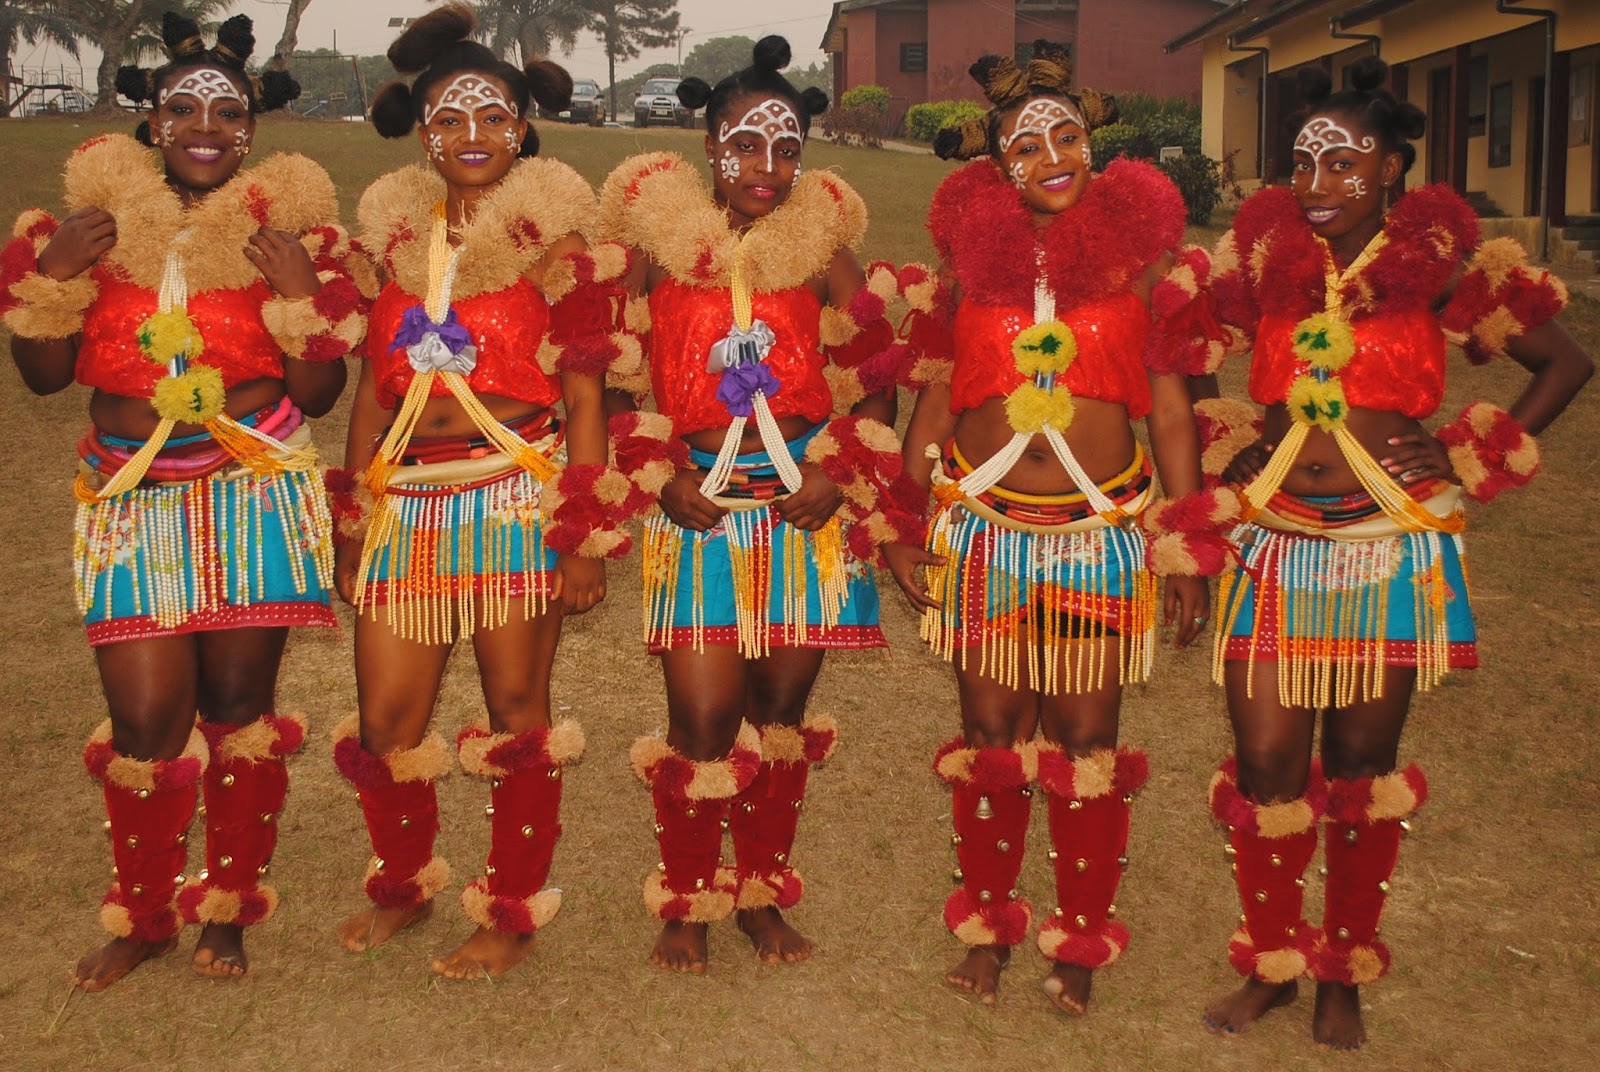 moninkim: A RESEARCH ON MONINKIM DANCE OF THE EJAGHAM PEOPLE OF NIGERIA AND CAMEROON